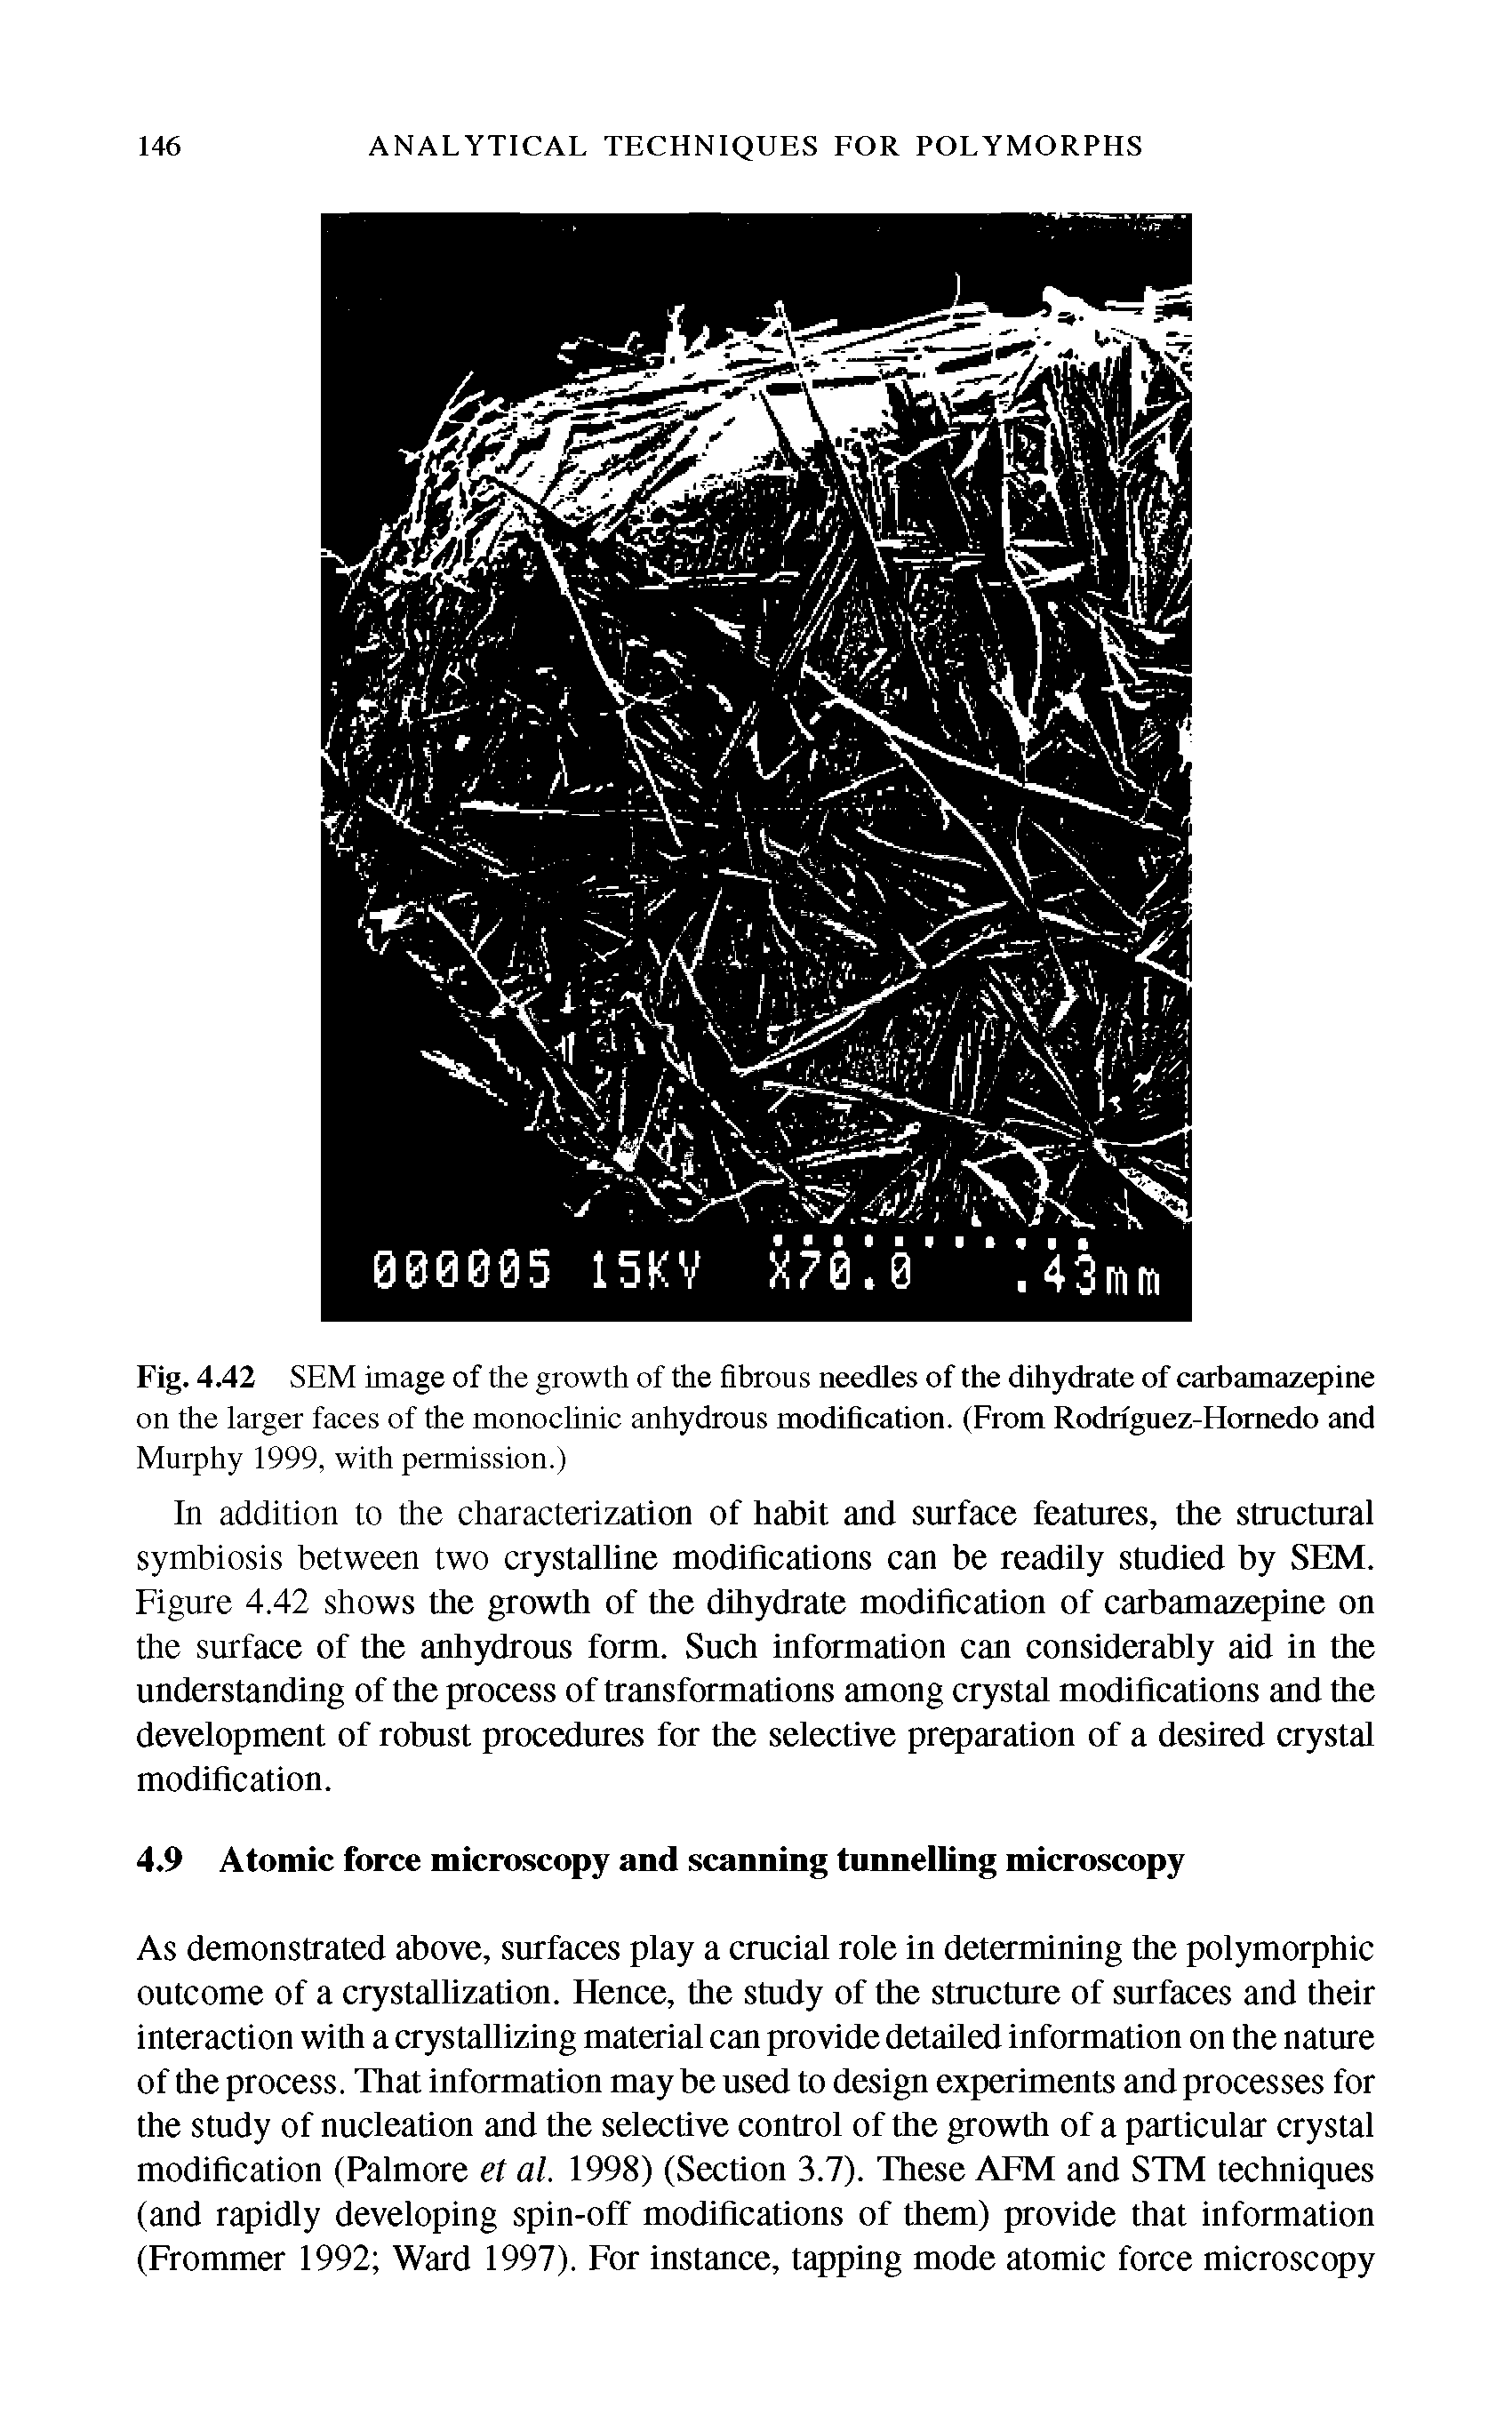 Fig. 4.42 SEM image of the growth of the fibrous needles of the dihydrate of carbamazepine on the larger faces of the monoclinic anhydrous modification. (From Rodriguez-Hornedo and Murphy 1999, with permission.)...